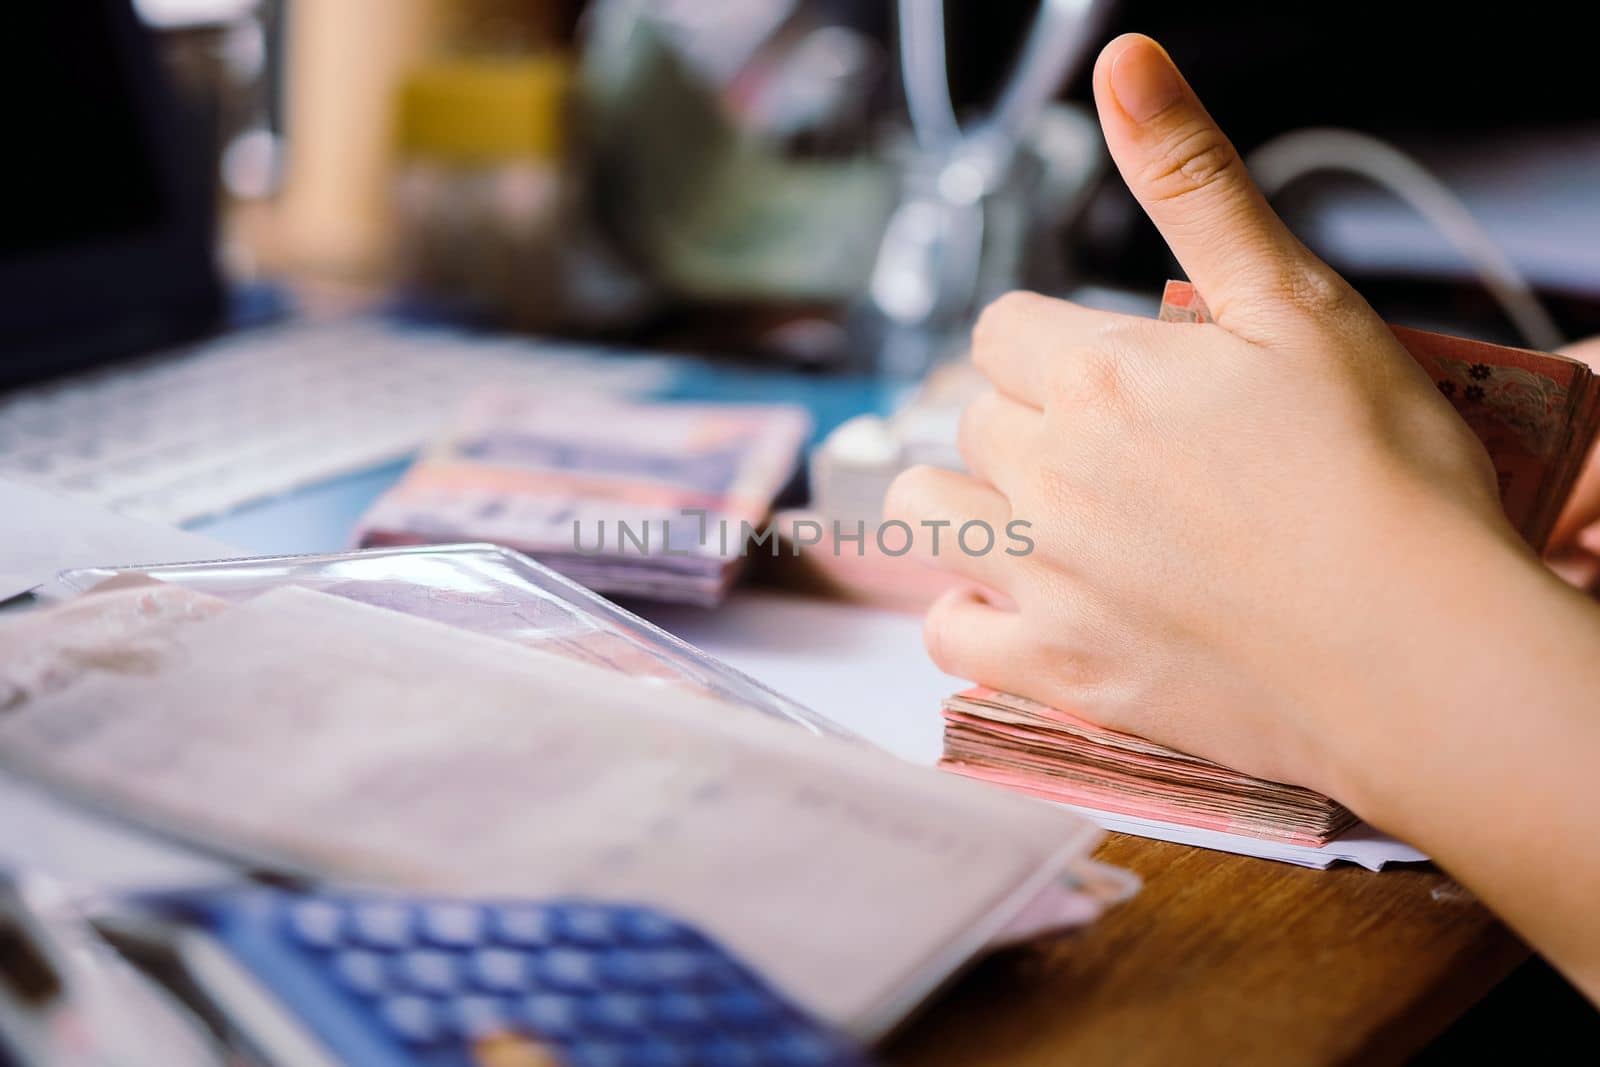 close up image of female hand count the money, business accounting background